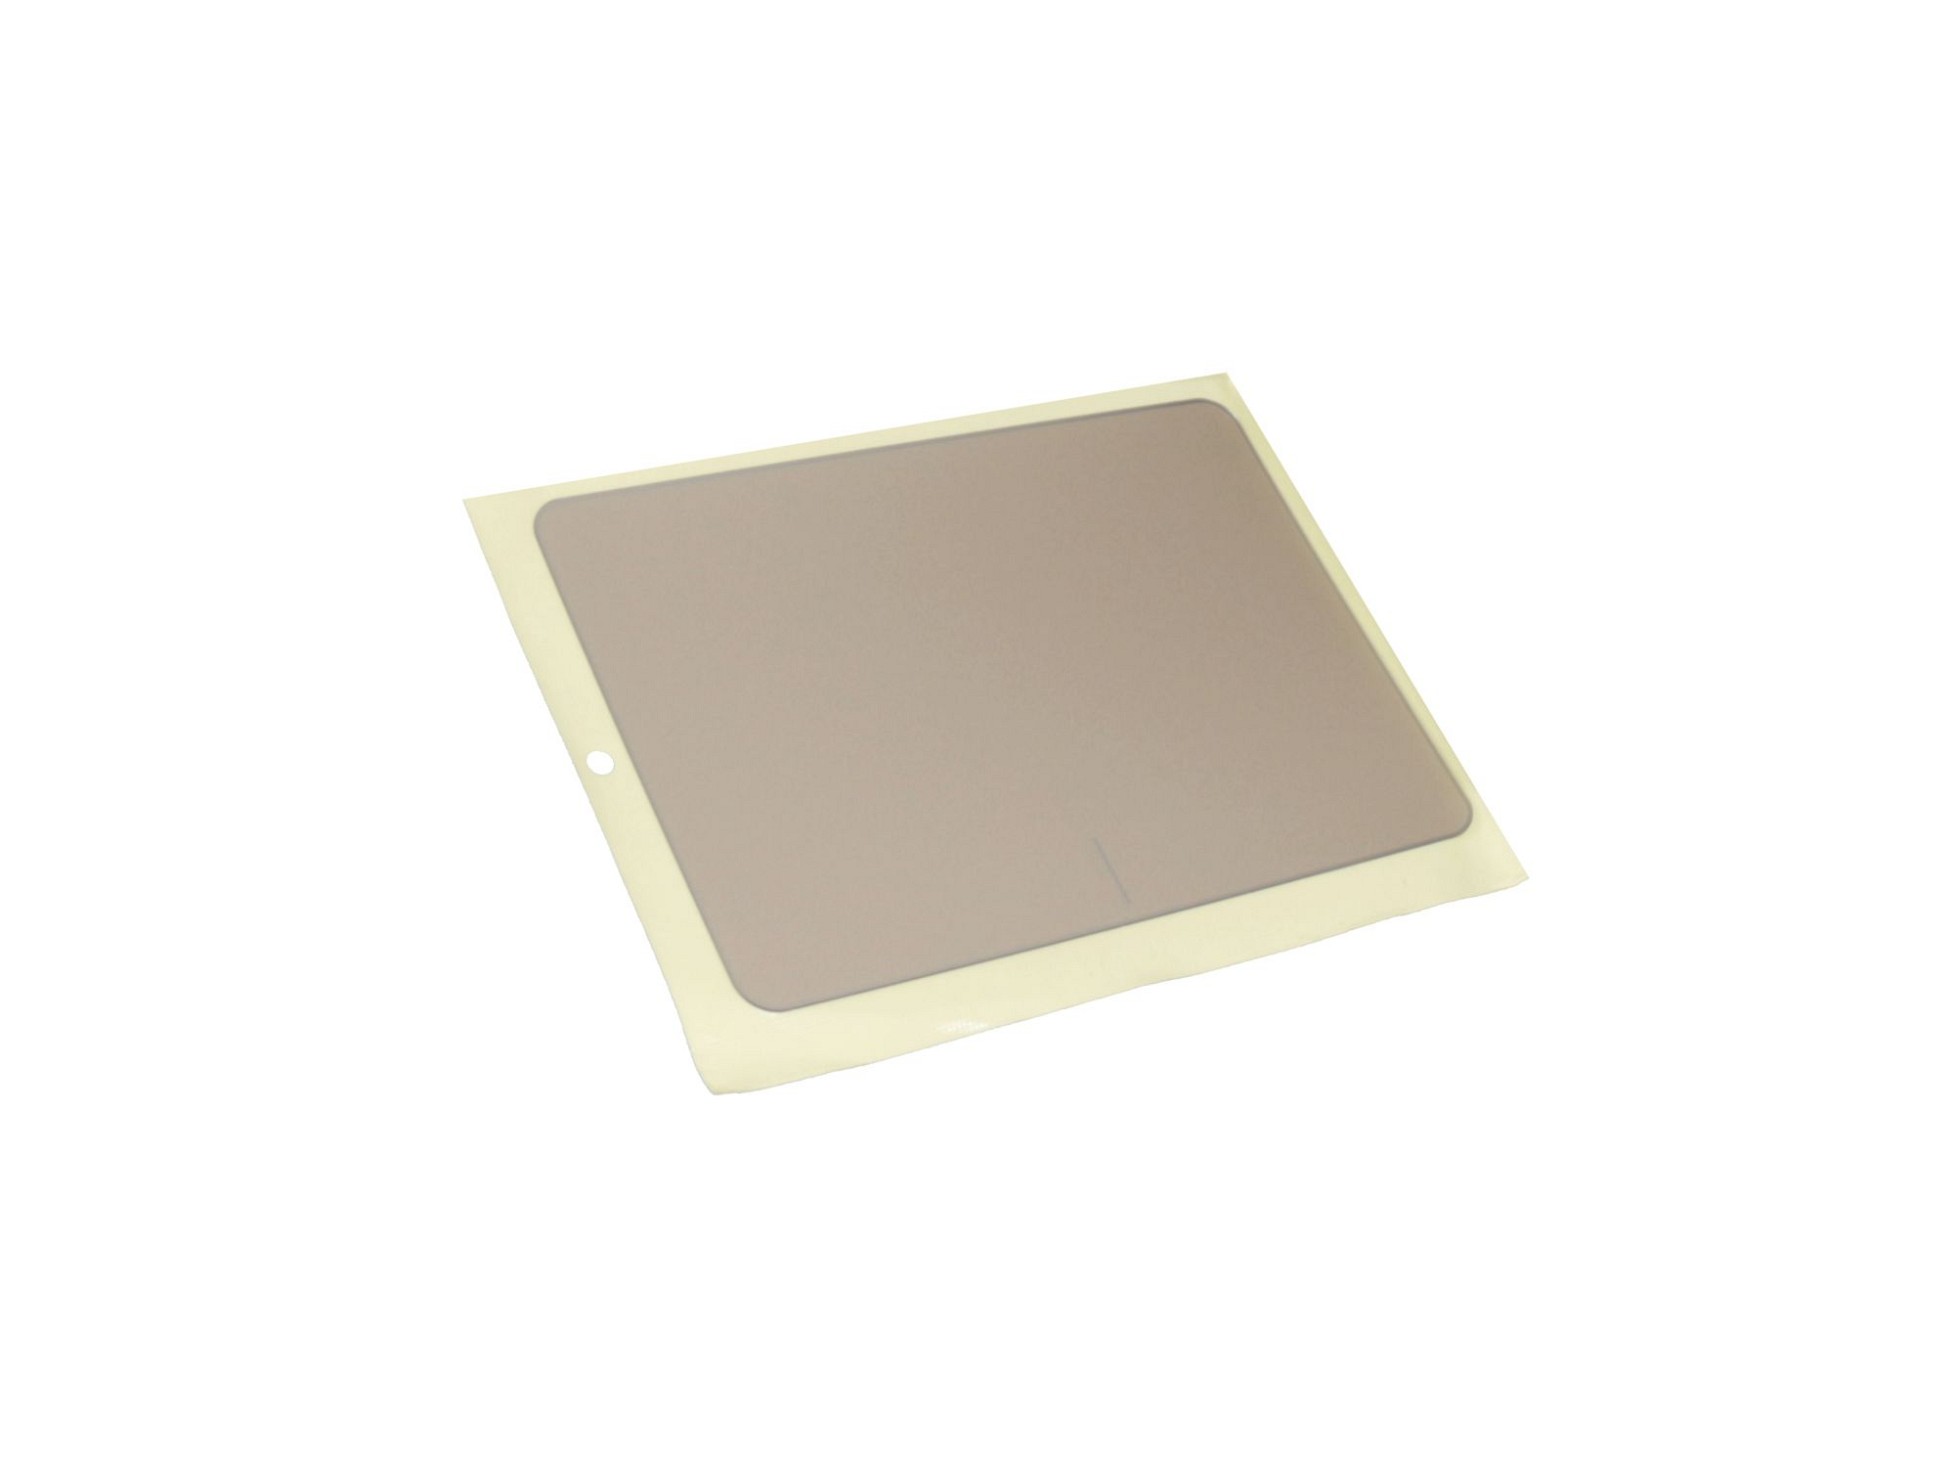 Asus 13NB0B01L05011 Touchpad Abdeckung gold